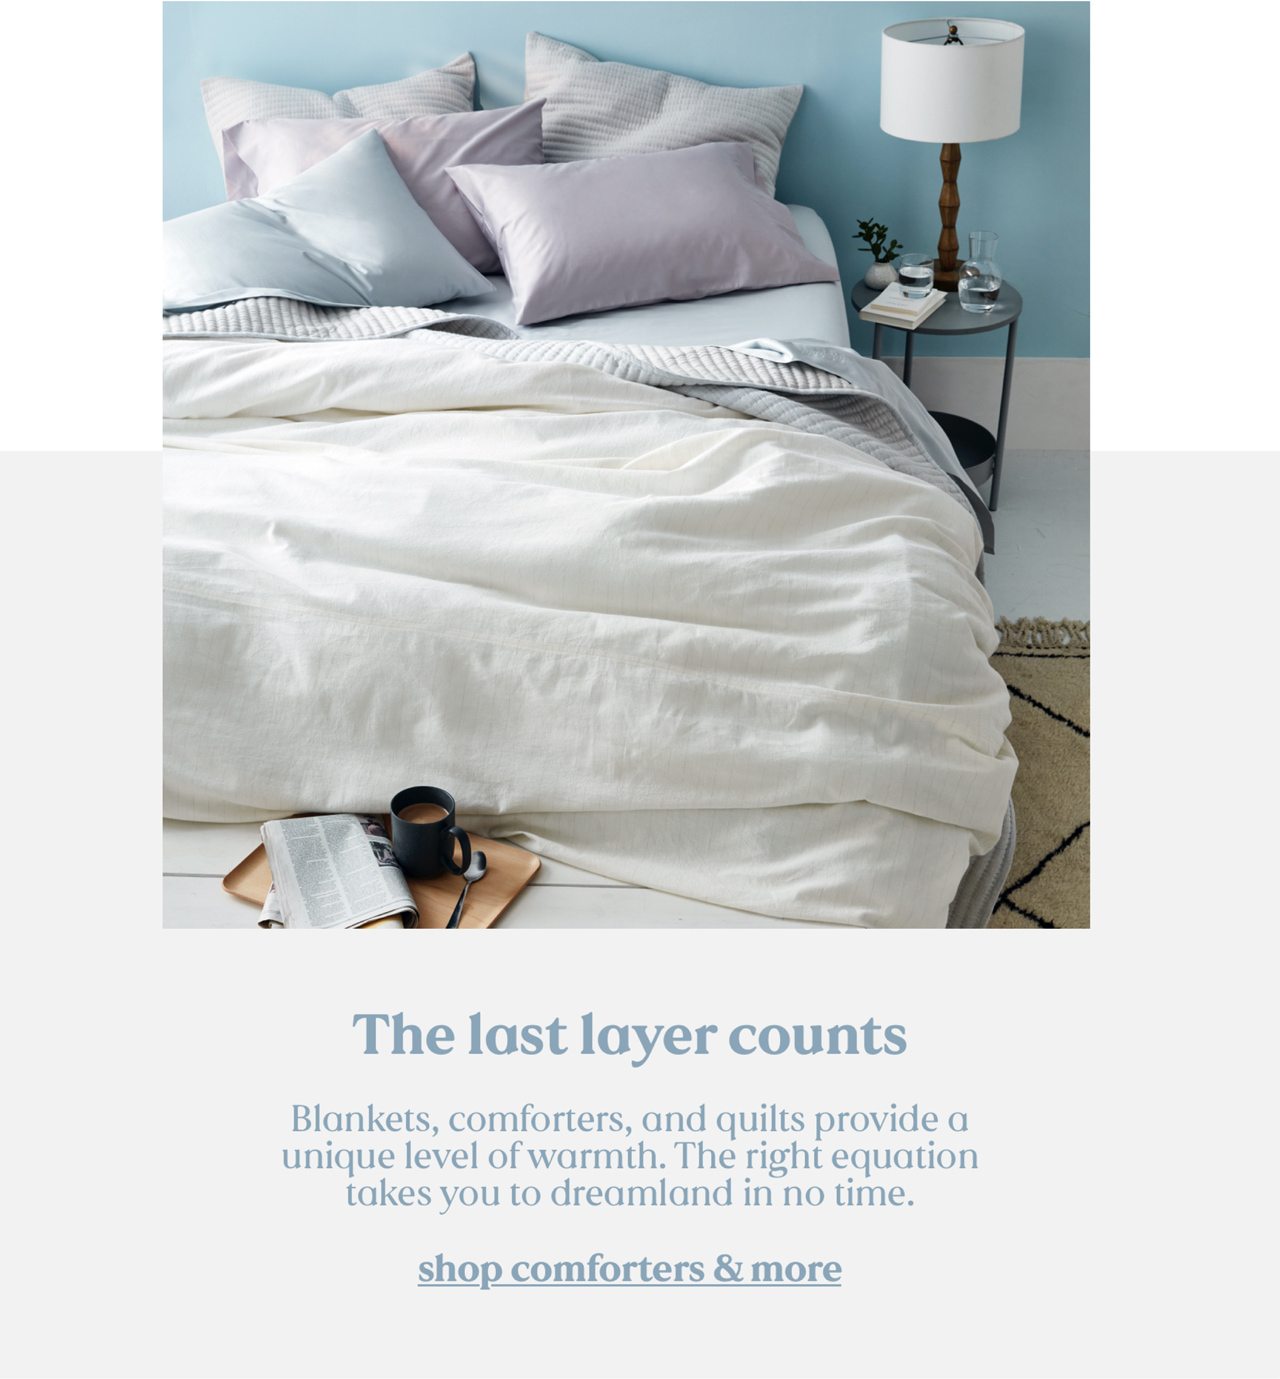 The last layer counts. Blankets, comforters, and quilts provide a unique level of warmth. The right equation takes you to dreamland in no time. shop comforters & more